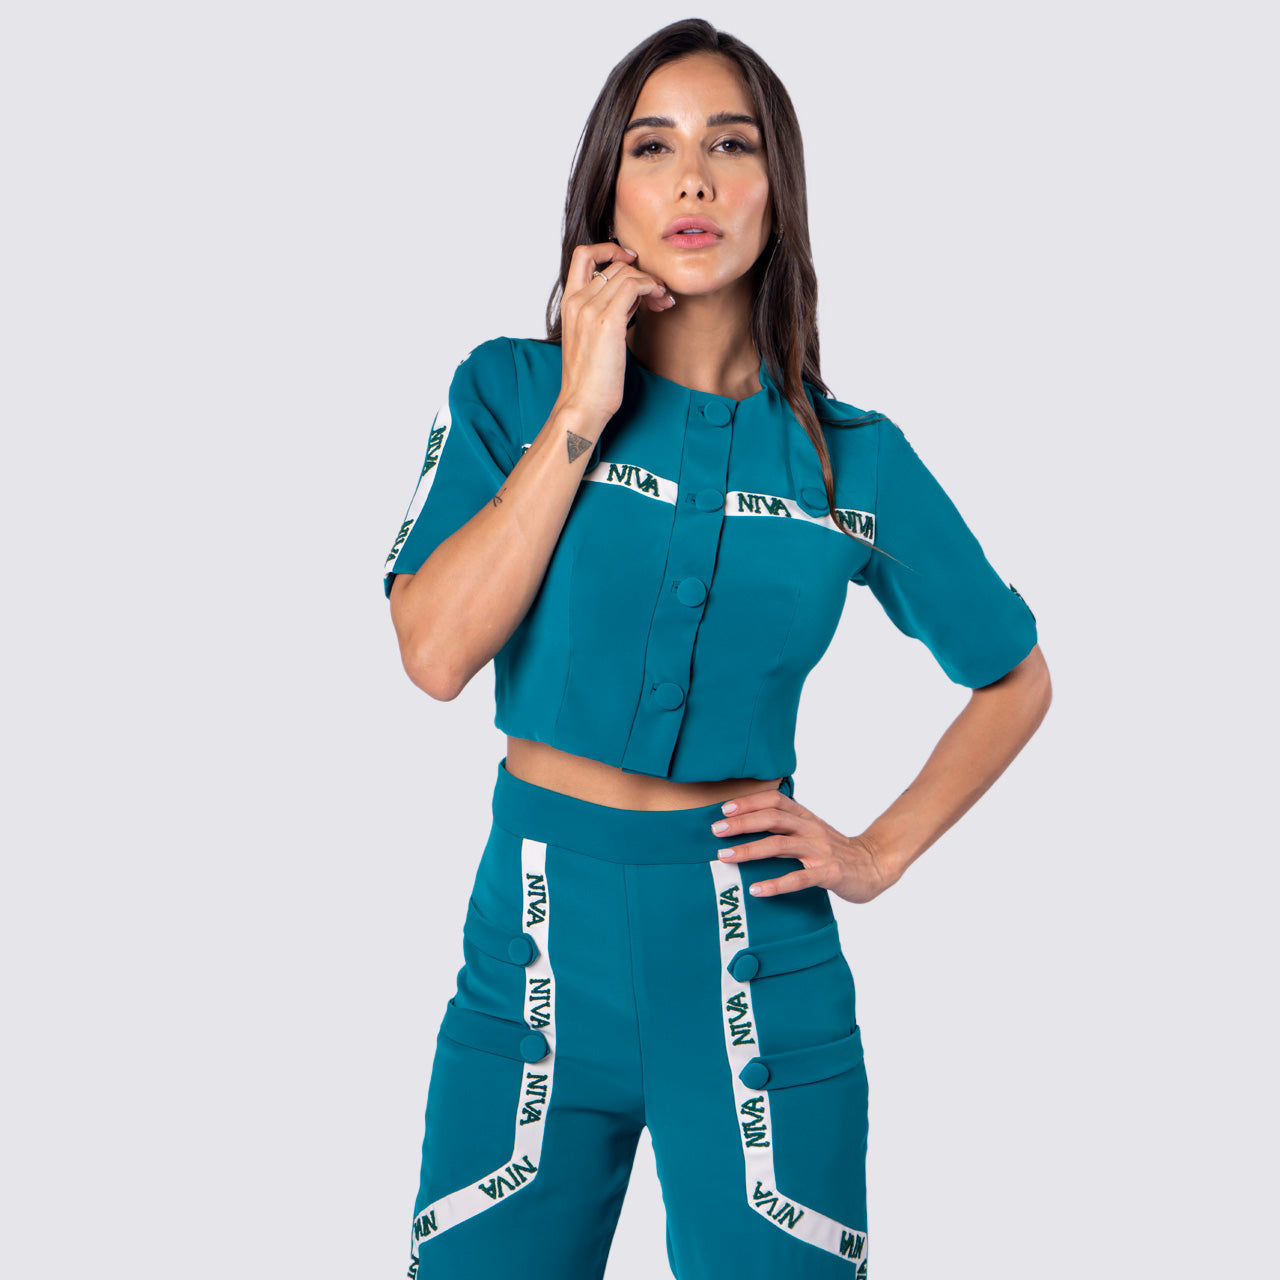 This Niva Embellished crop top featuring greatest styling of all times. Soft crepe fabric in captivating tone of teal green color with the highlights of nude niva embroidery piping used in an innovative way in all over this piece. Style it with matching pants from Niva and be ready for compliments amongst friends and colleagues.